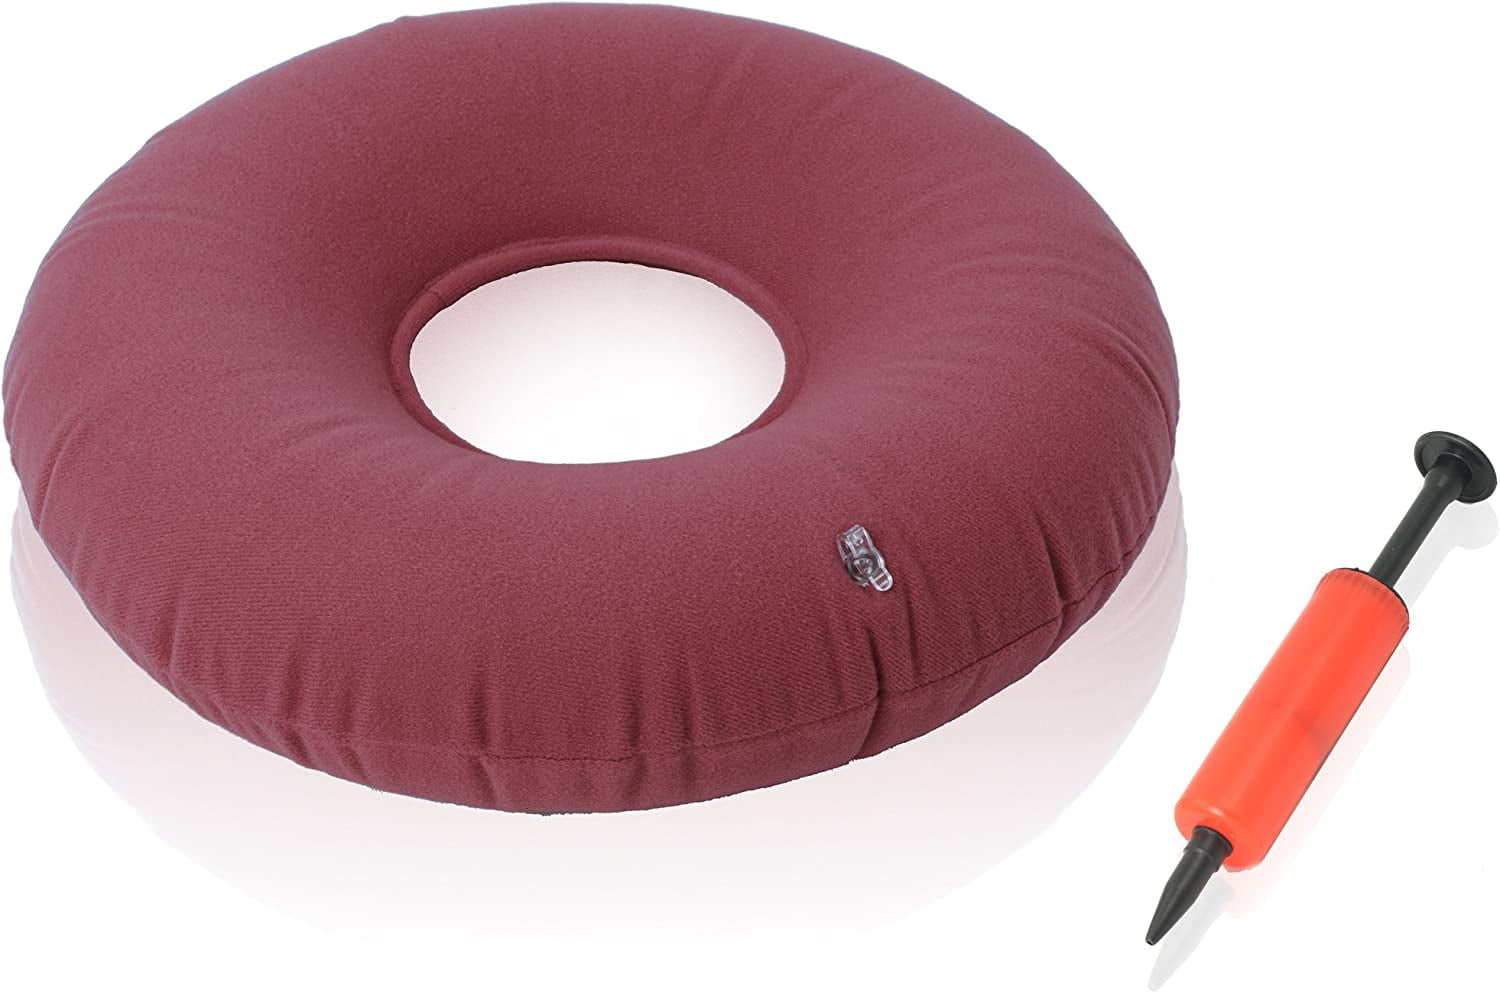 3pcs Donut Cushion Seat Portable Seat Coccyx Tailbone Pillow, Hemorrhoid  Pillow Seat Ring, Inflatable Round Cushion St-4